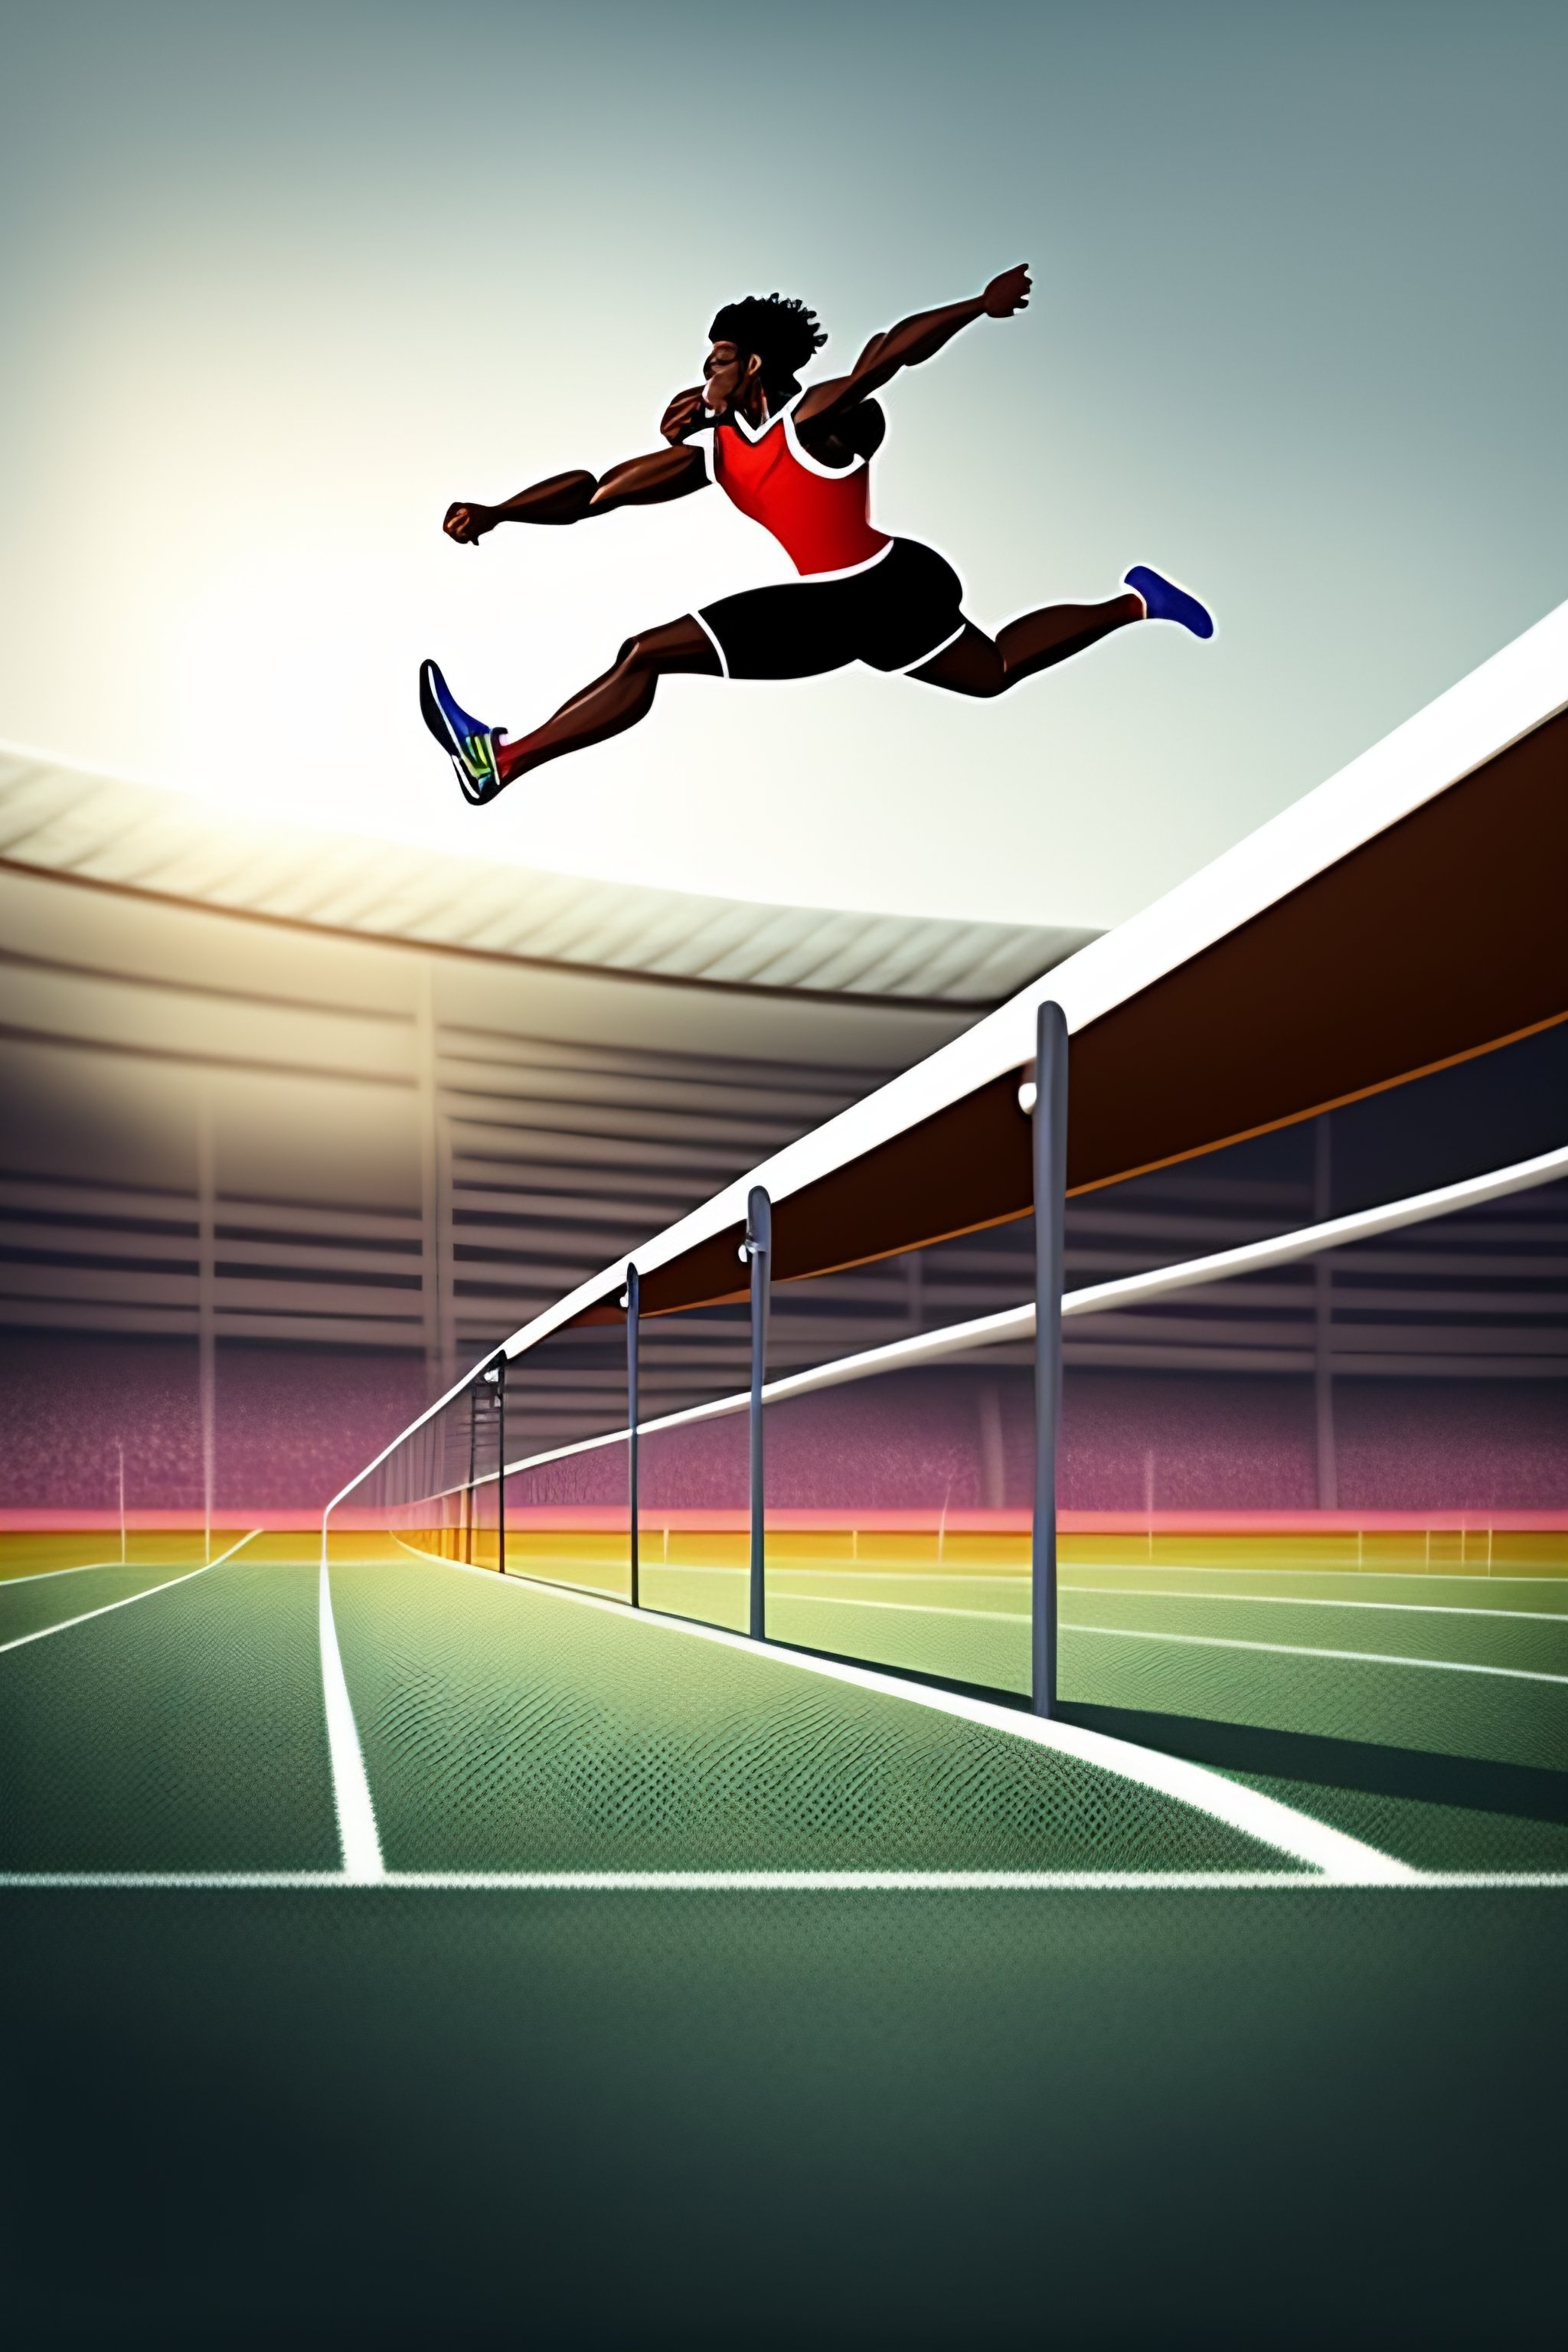 Lexica - Cartoon of a person leaping over a hurdle in track and field.  person is actively leaping over hurdle